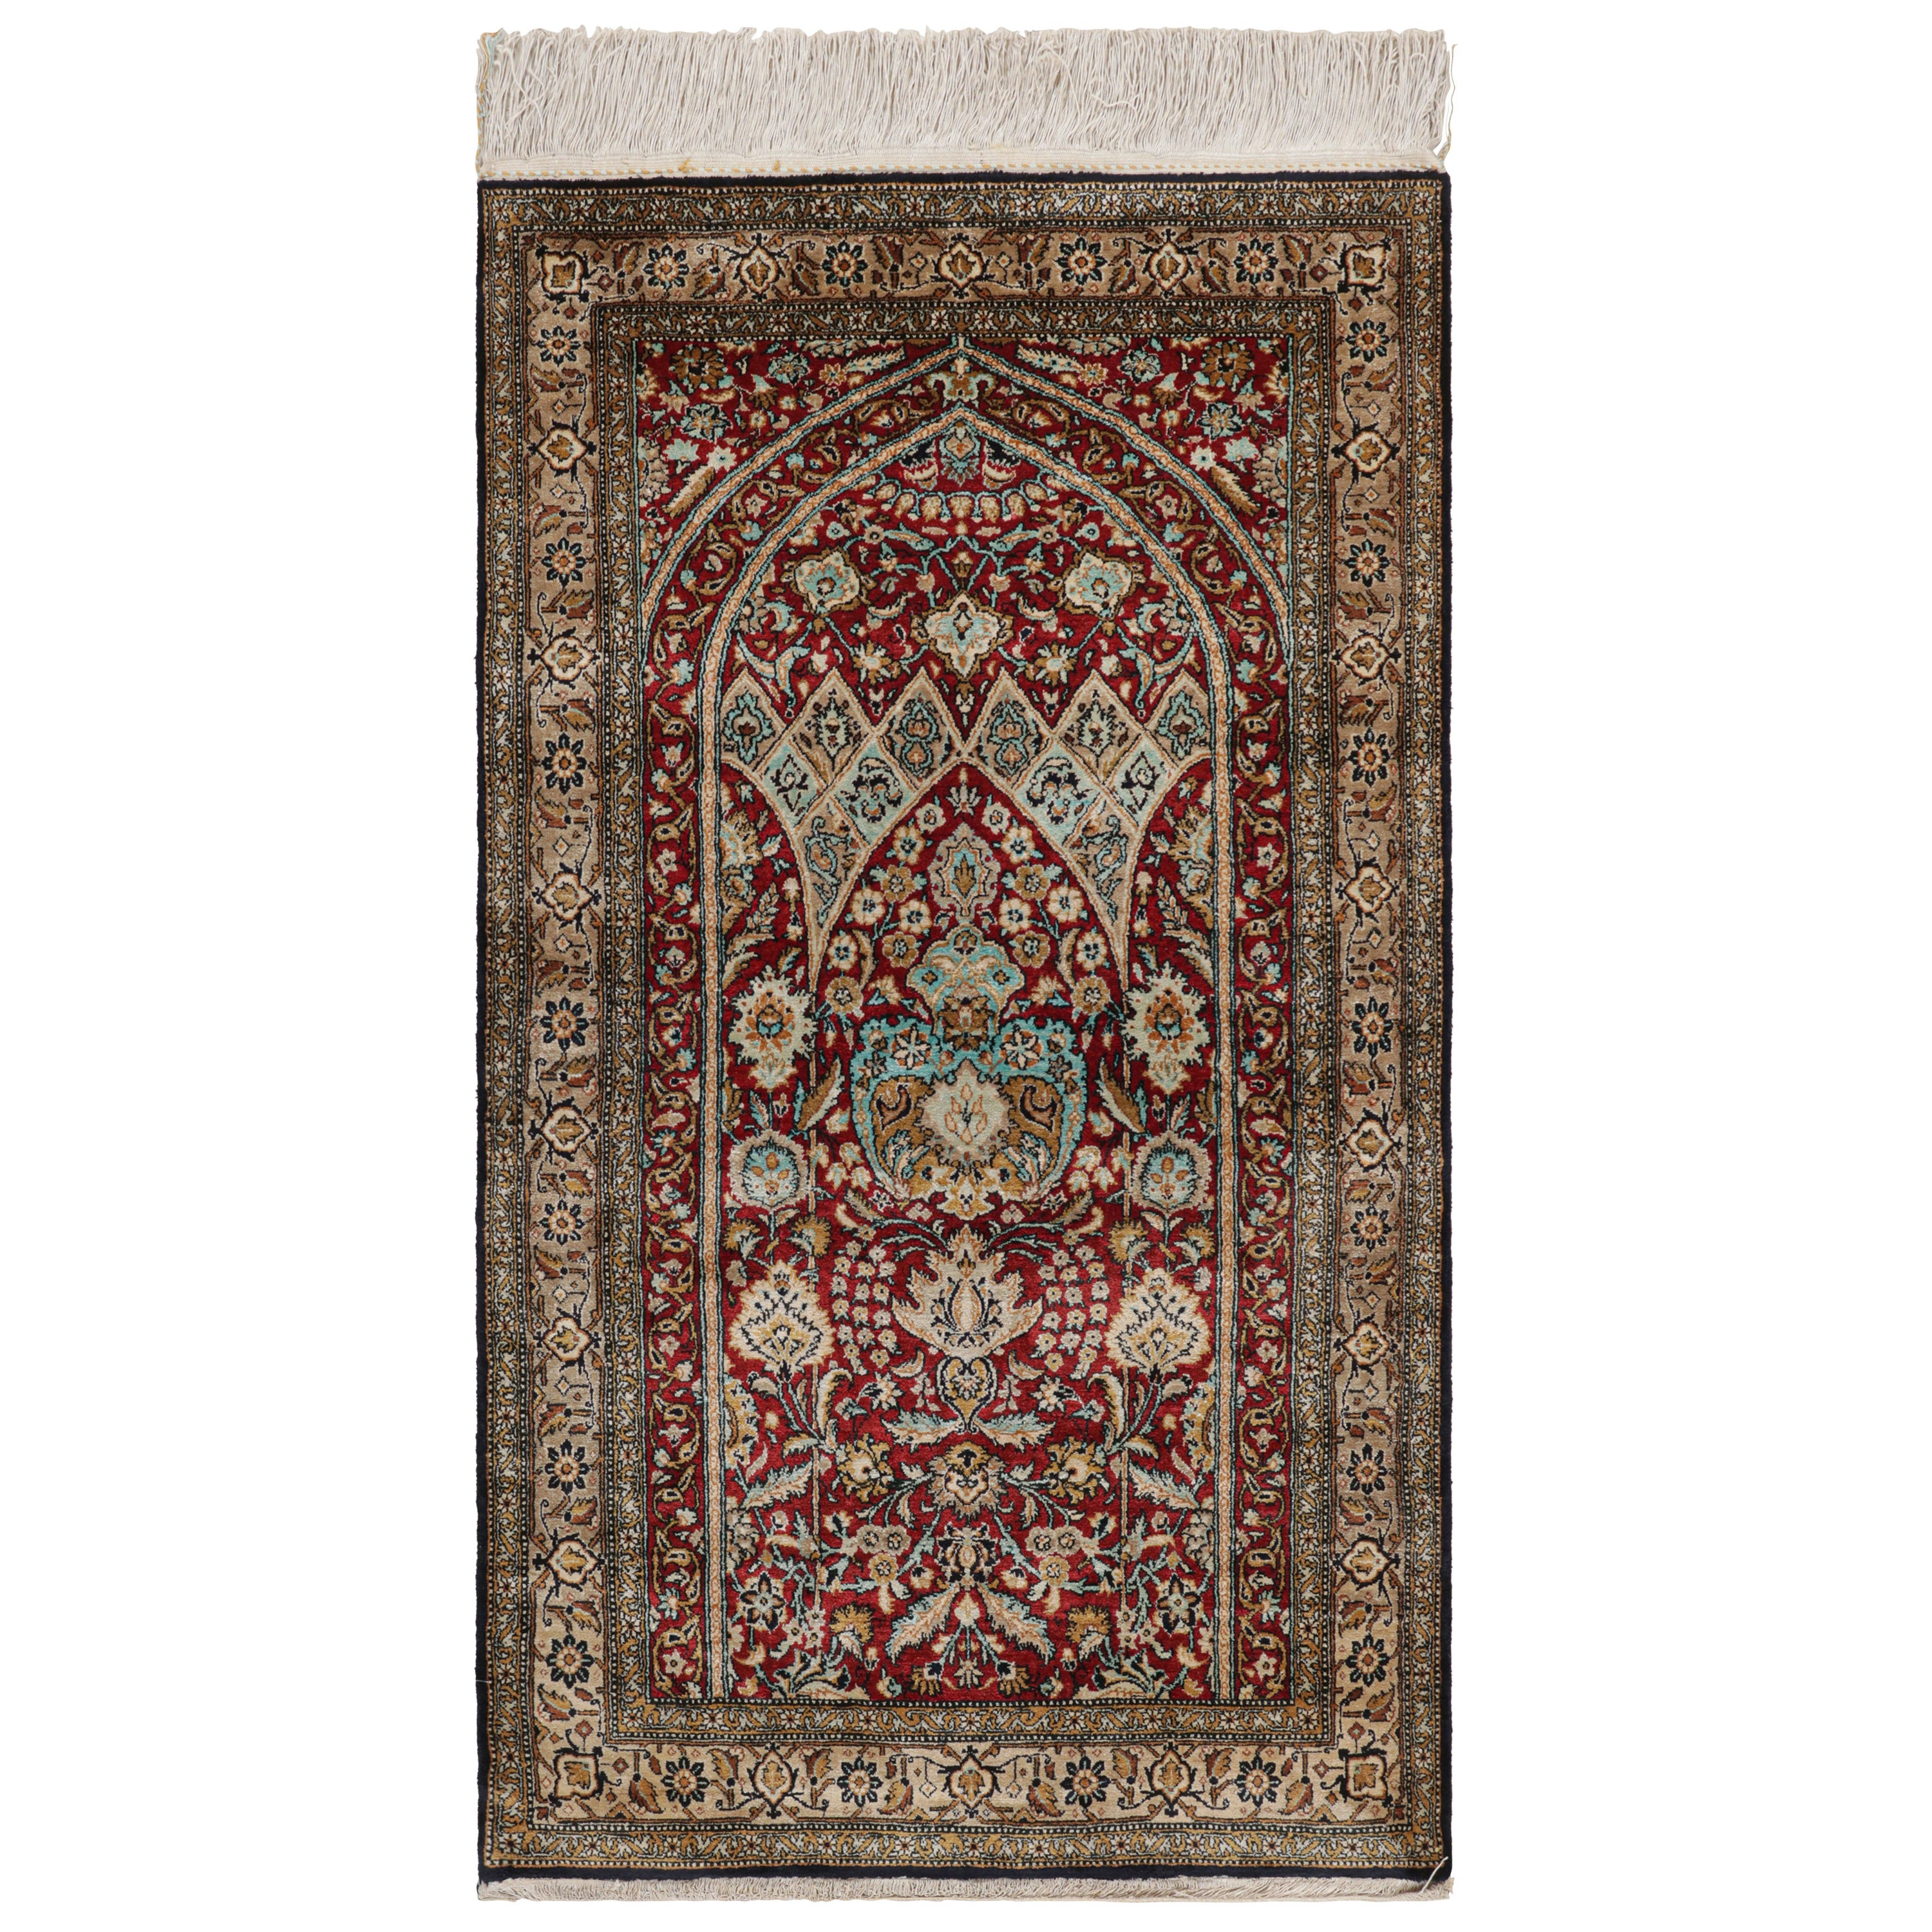 Antique Persian Qum Rug in Burgundy With Floral Patterns, From Rug & Kilim For Sale